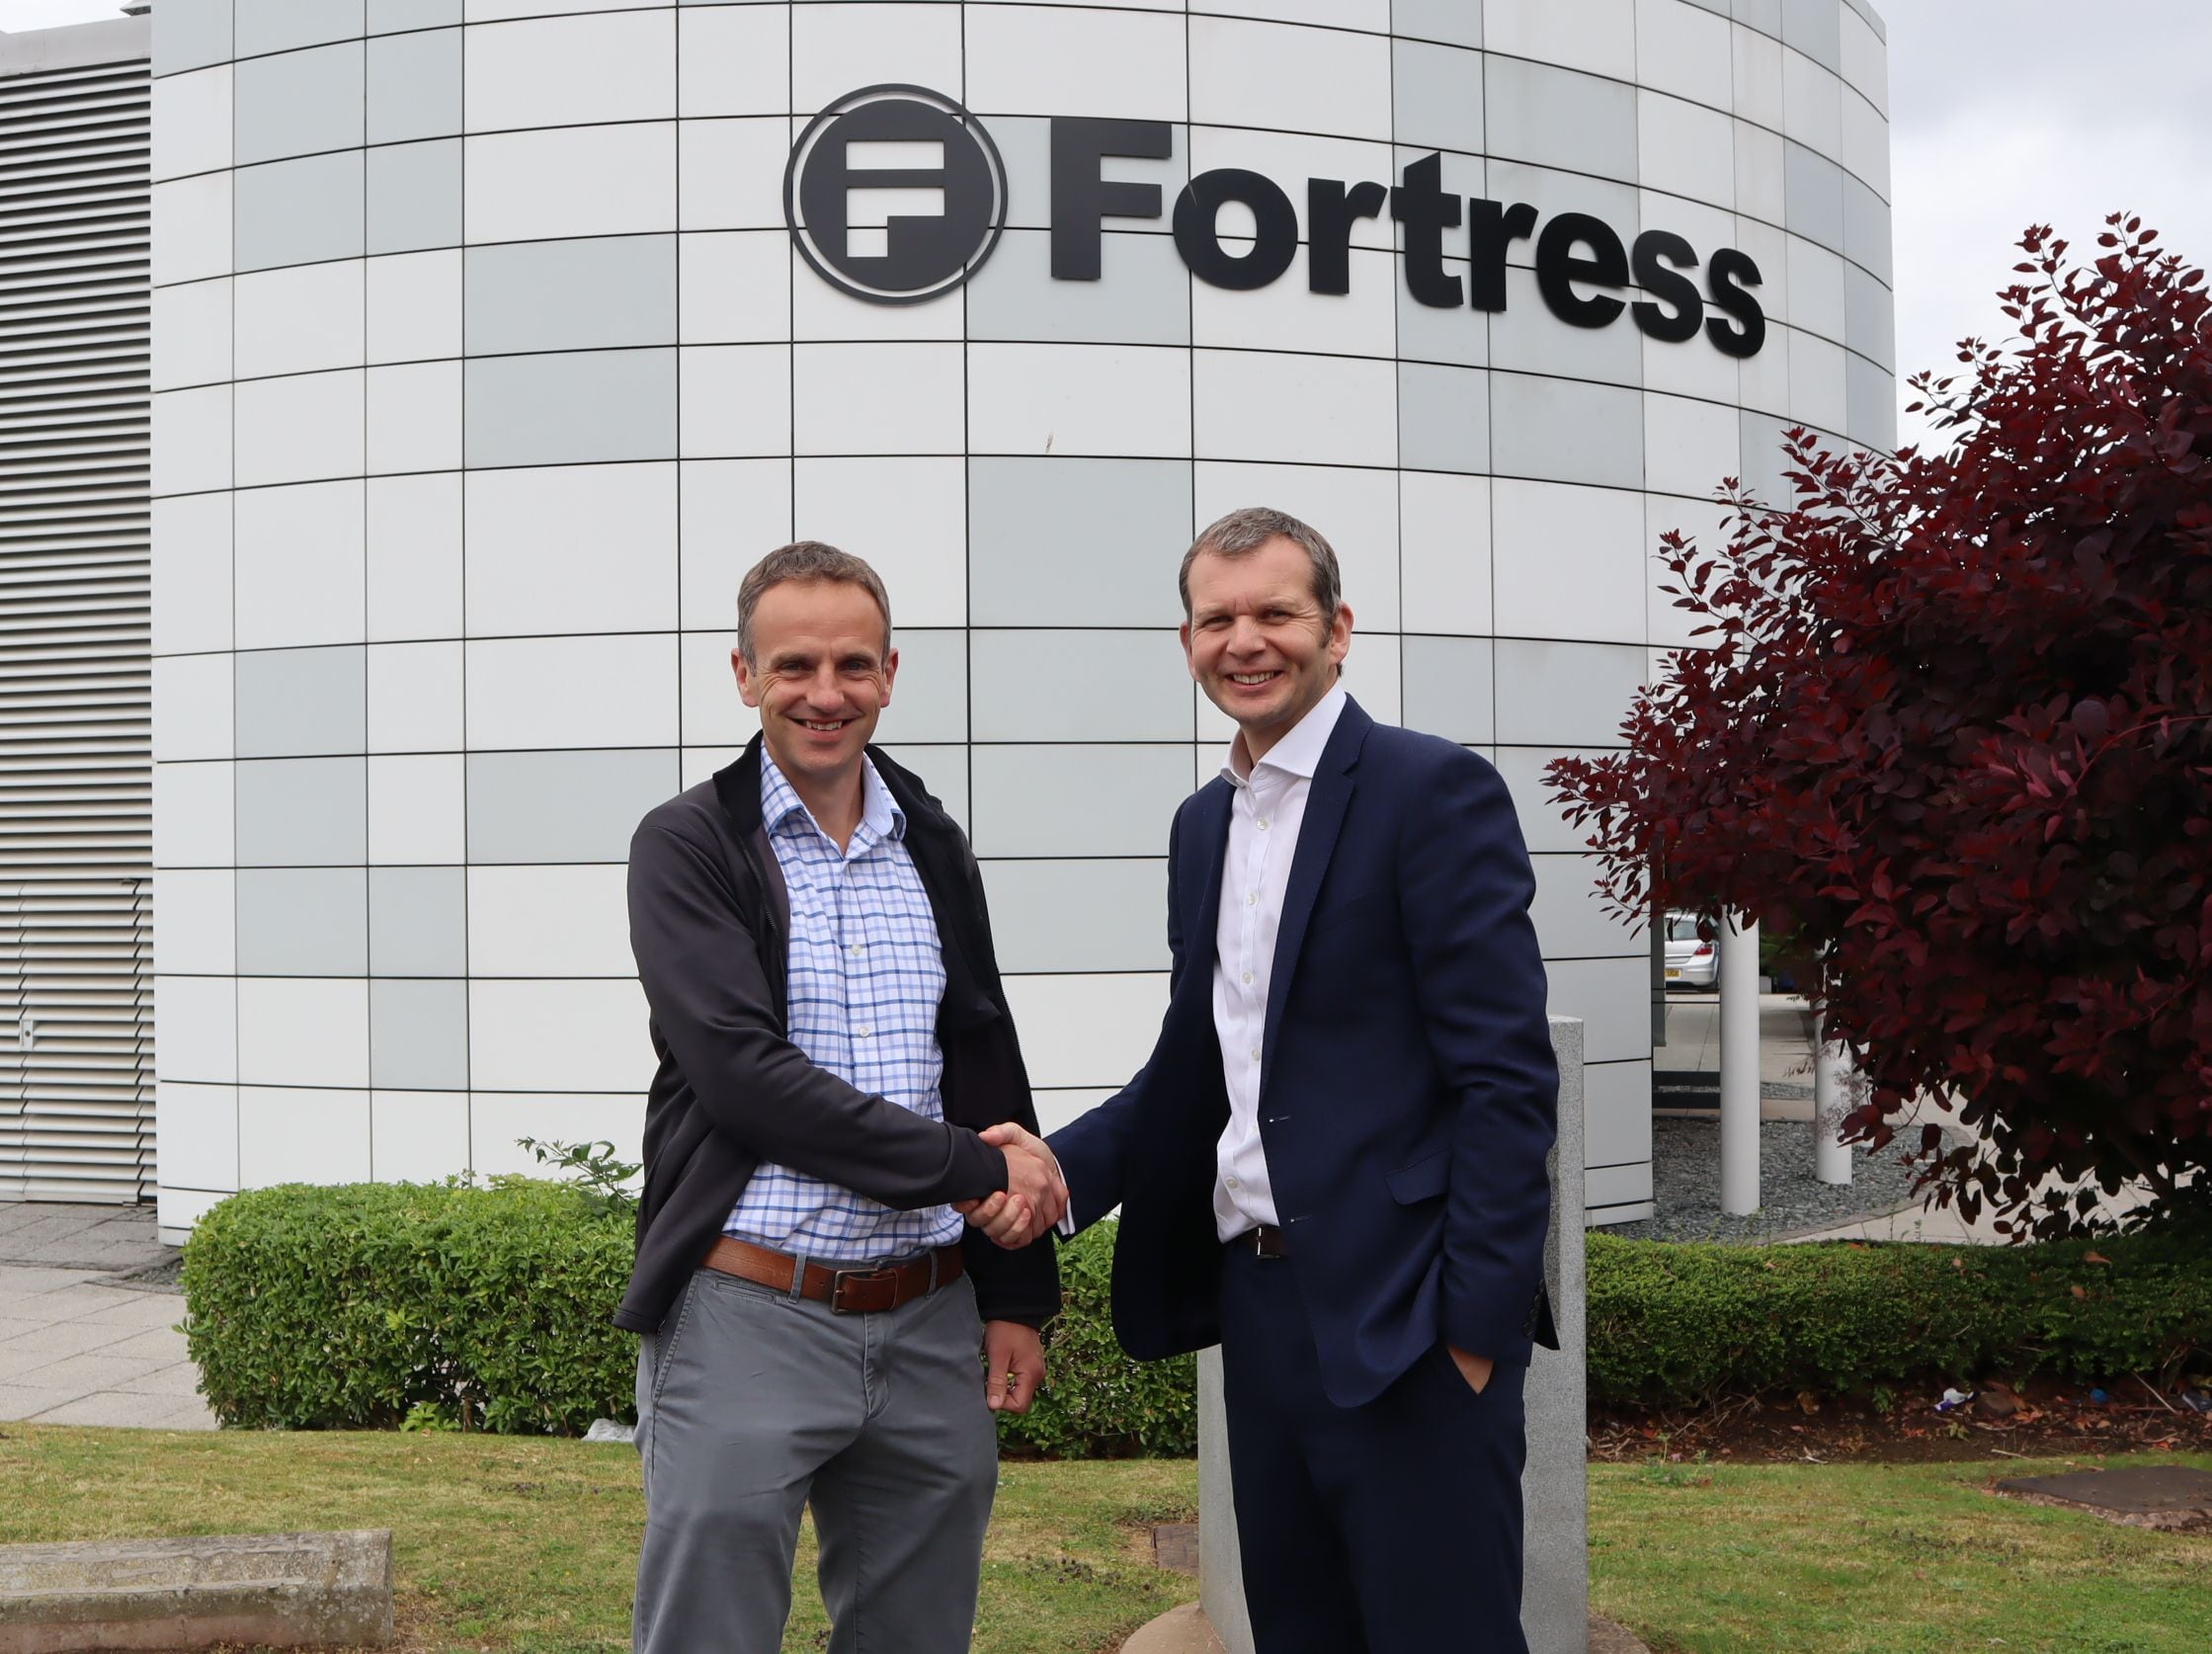 Strategic acquisition for Fortress Safety